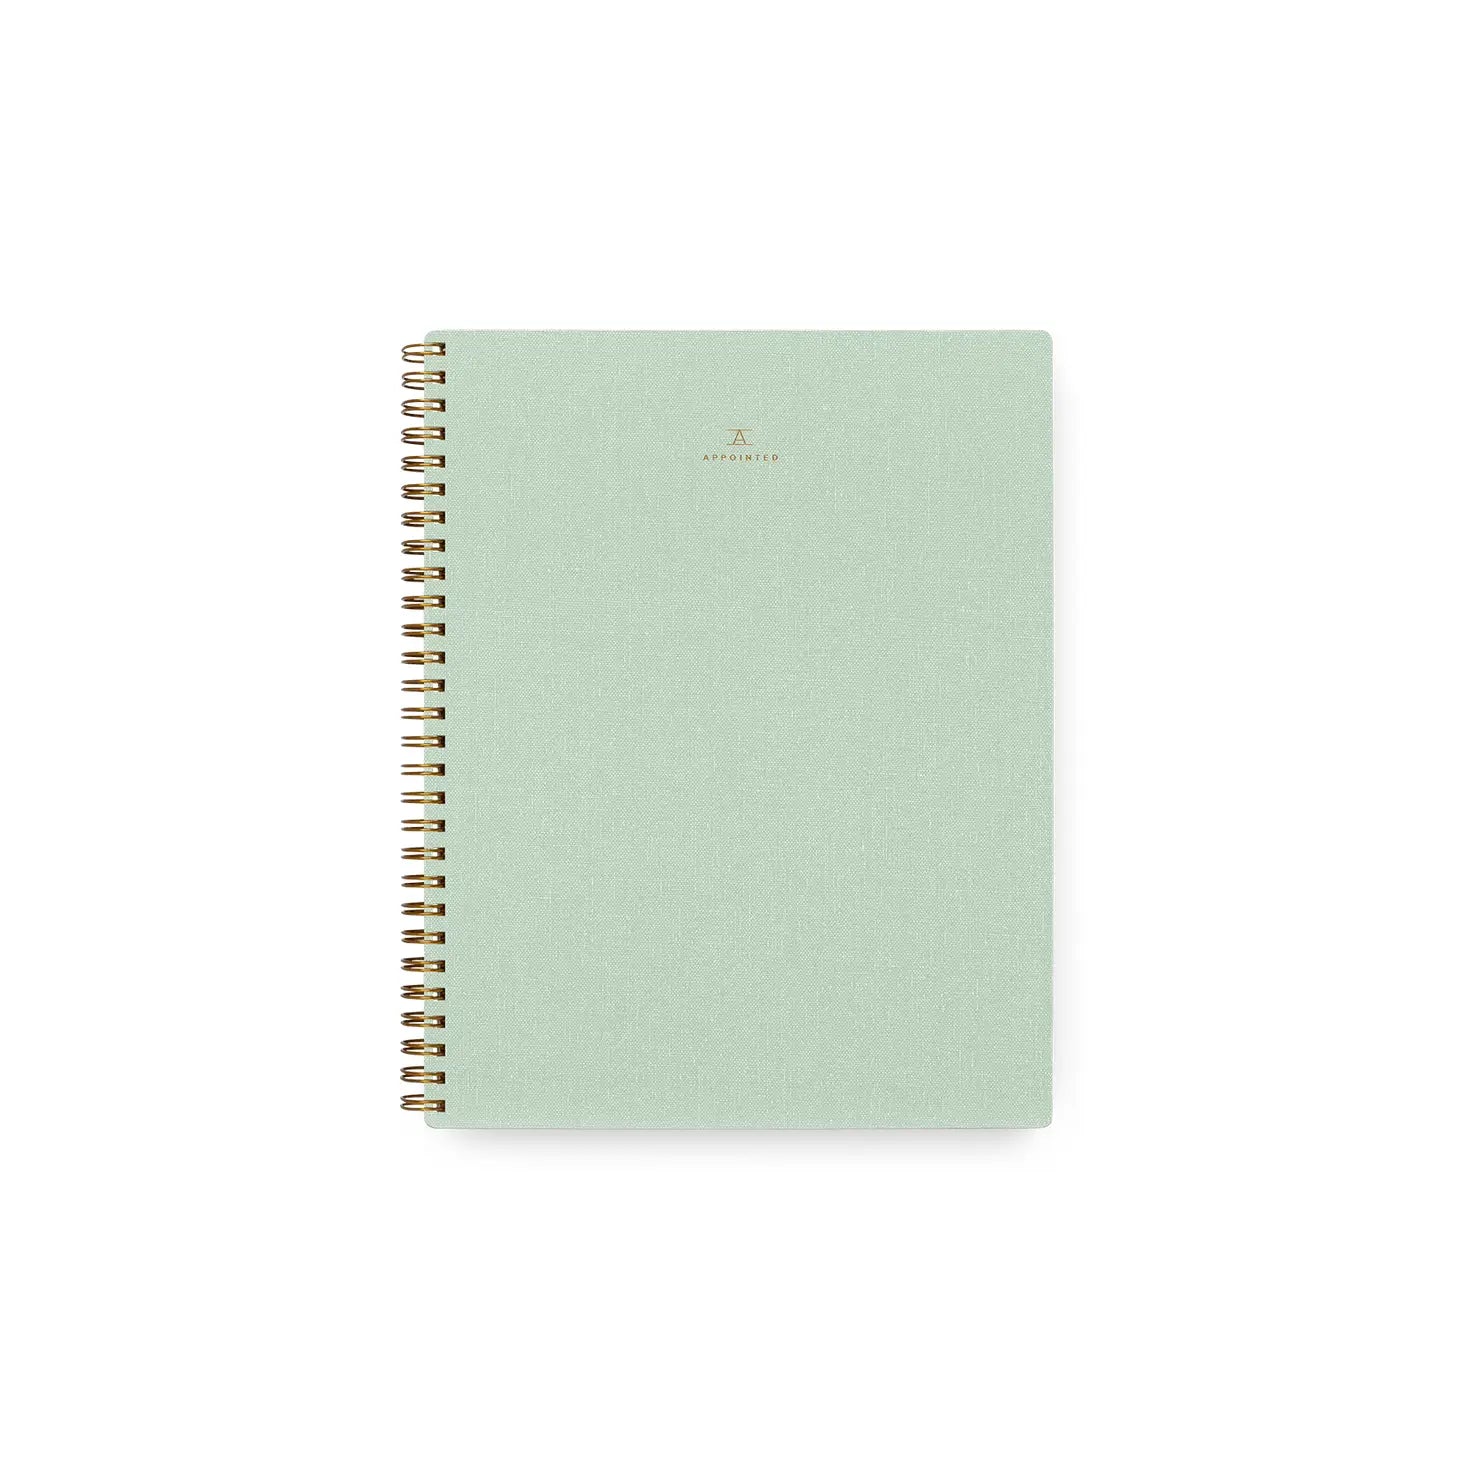 Appointed Coiled Notebook Grid - Mineral Green